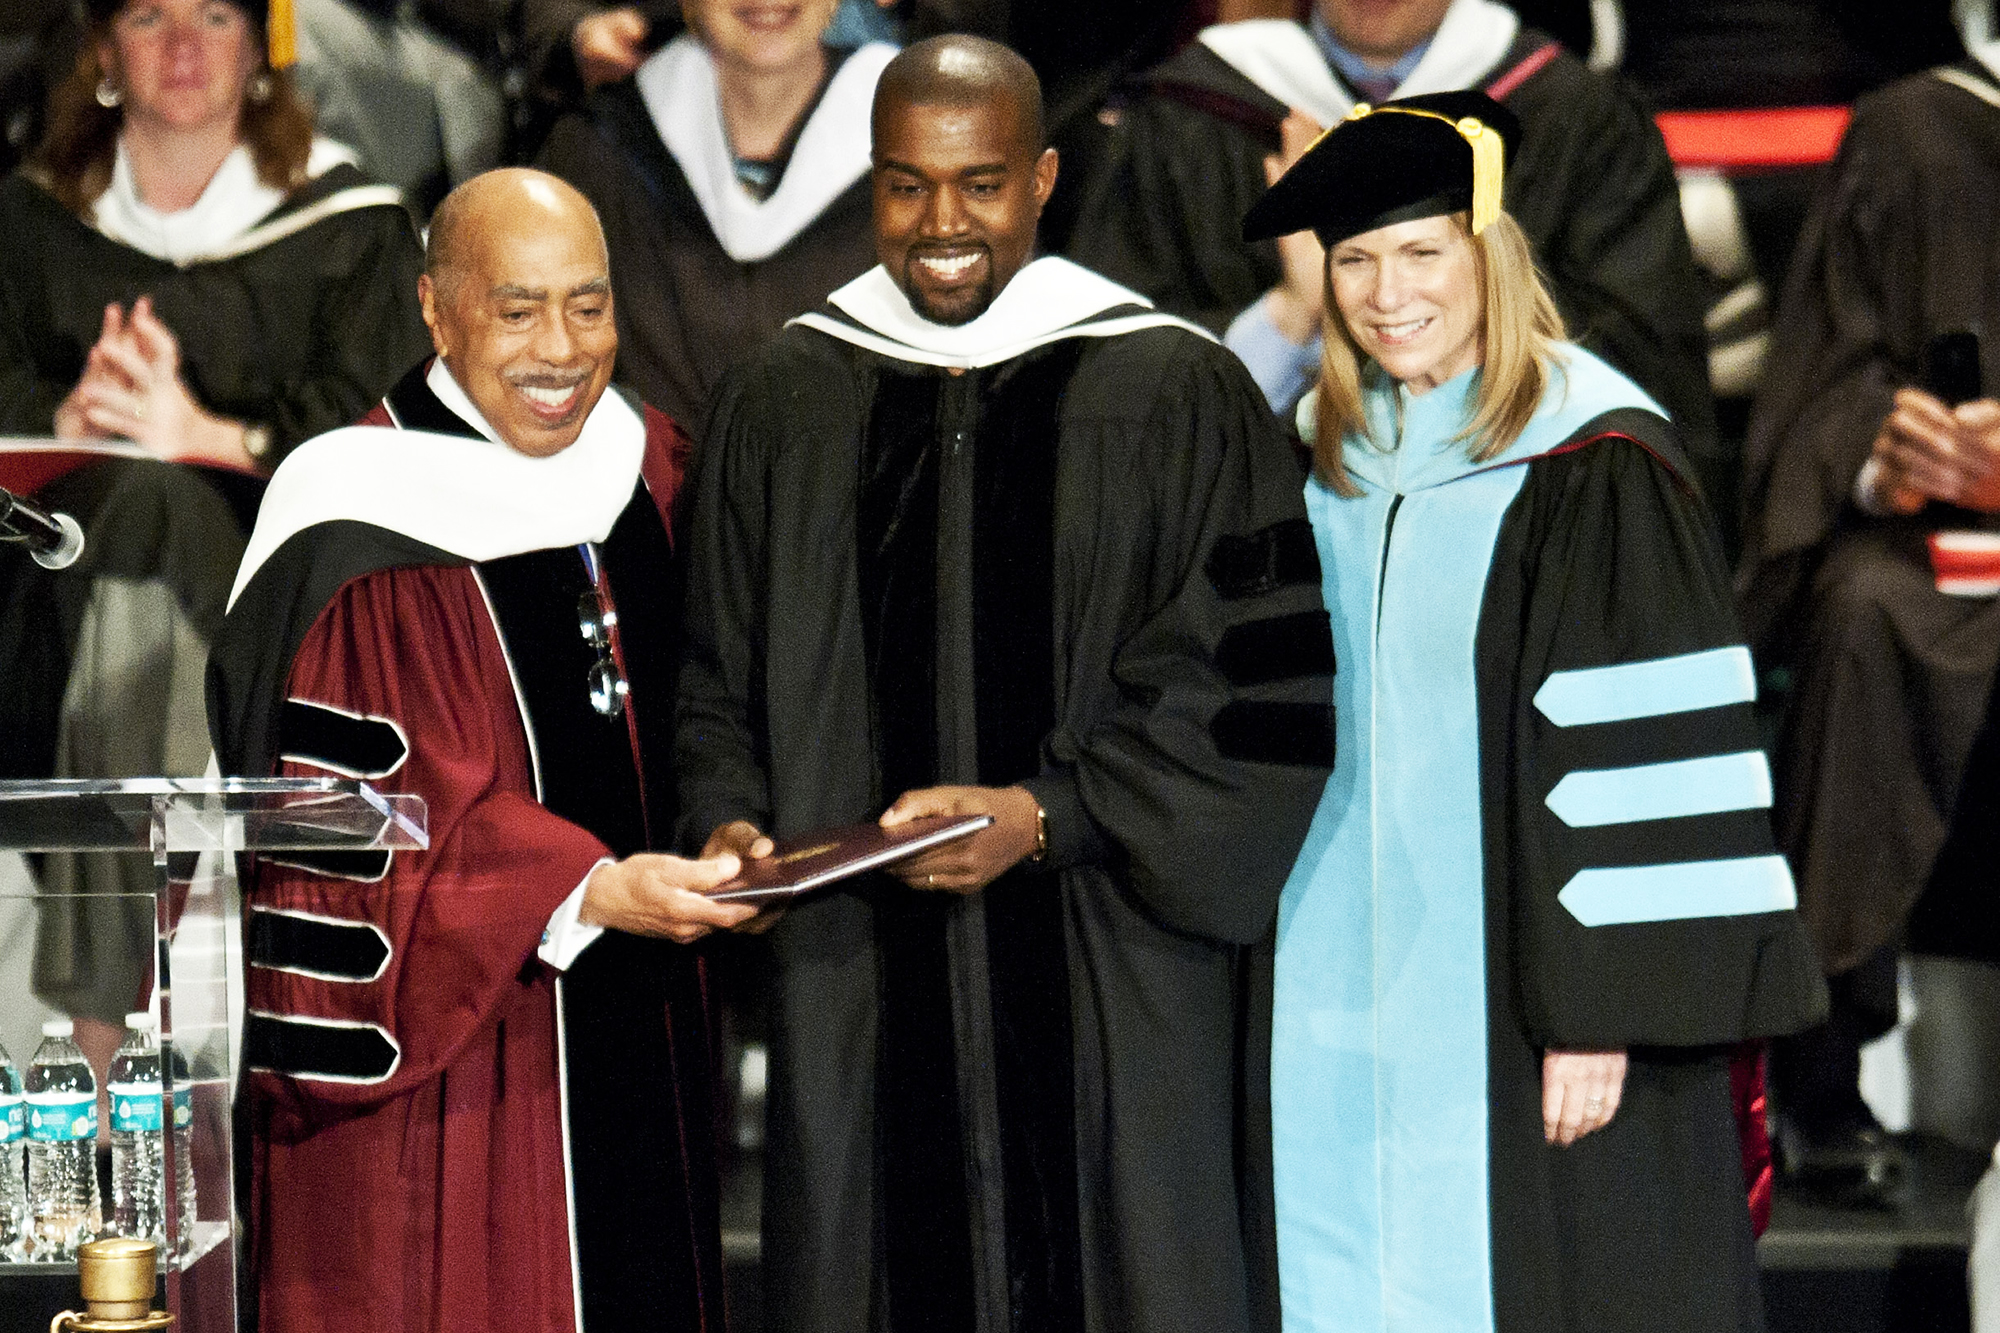 Kanye West receives an honorary doctorate at the School Of Art Institute Of Chicago commencement ceremony in Chicago, on May 11, 2015.